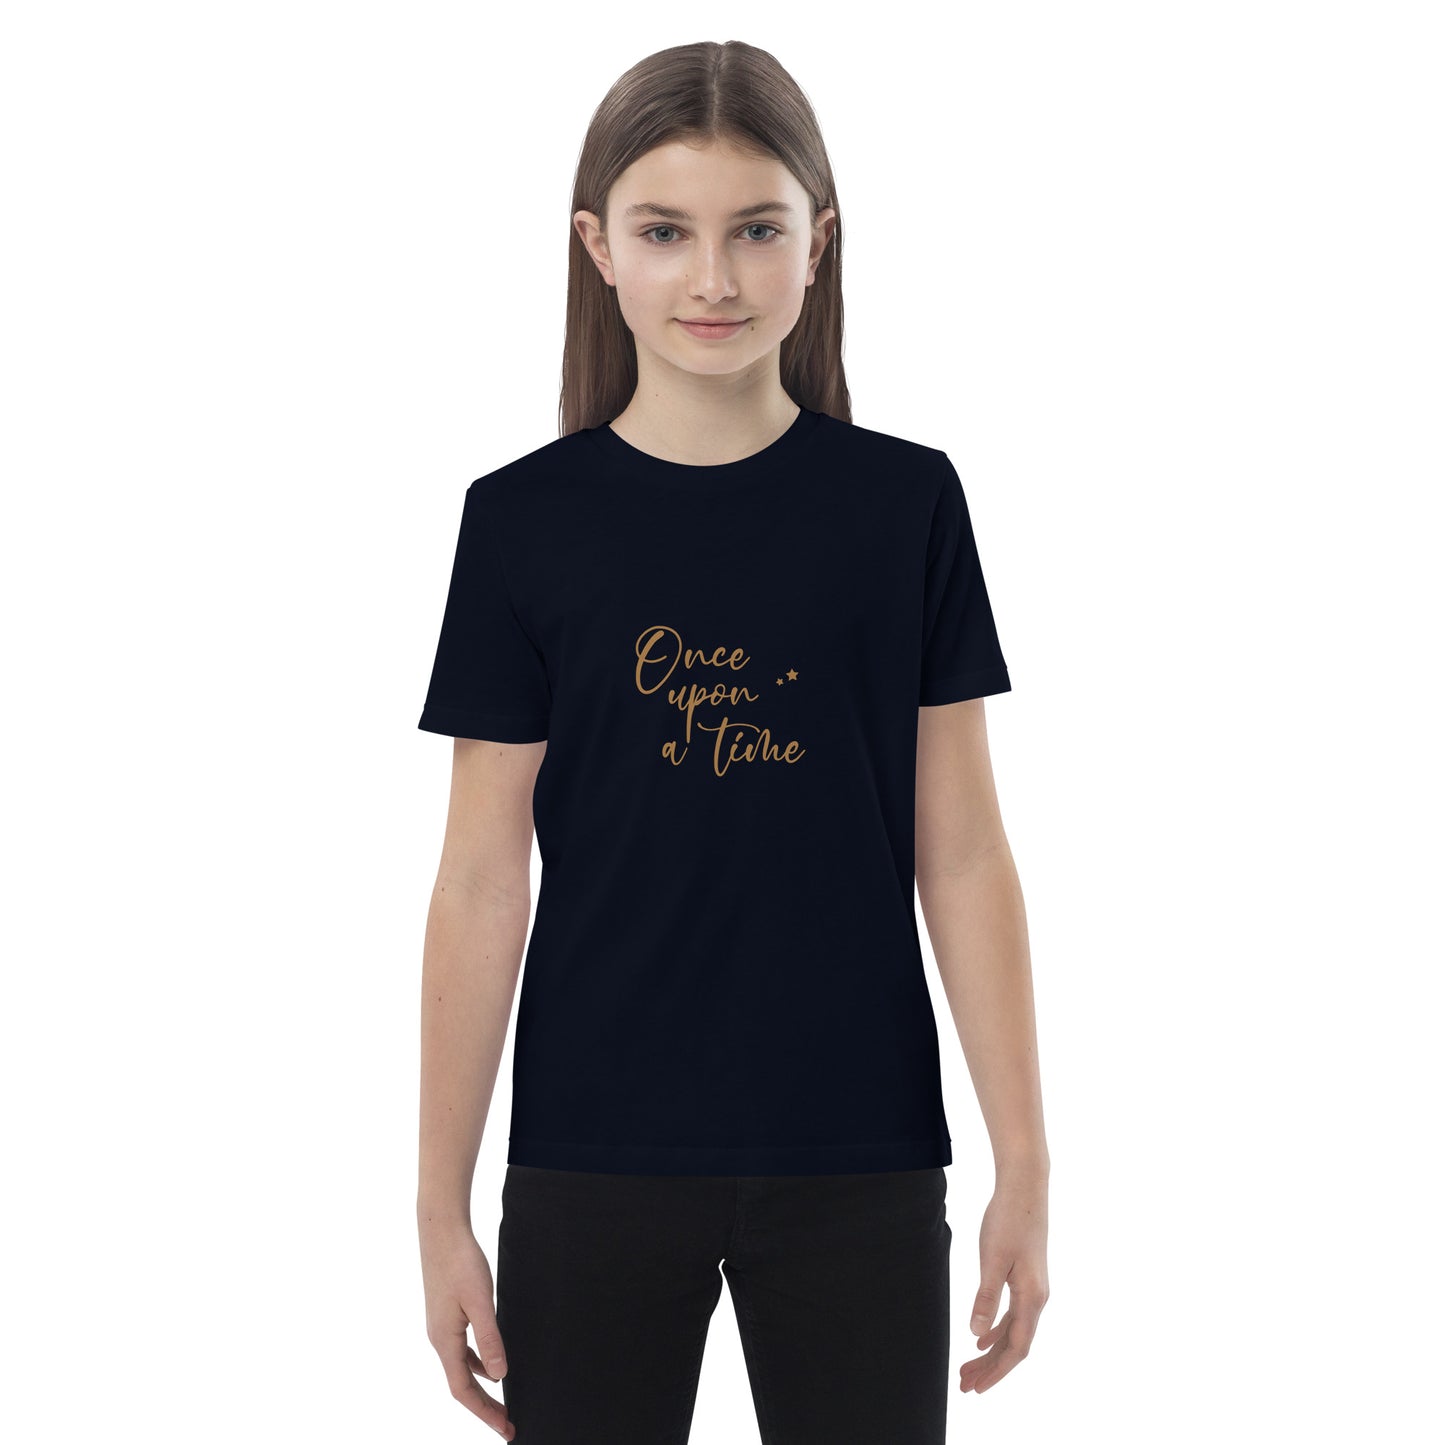 Once Upon a Time Kids Organic Cotton T-Shirt